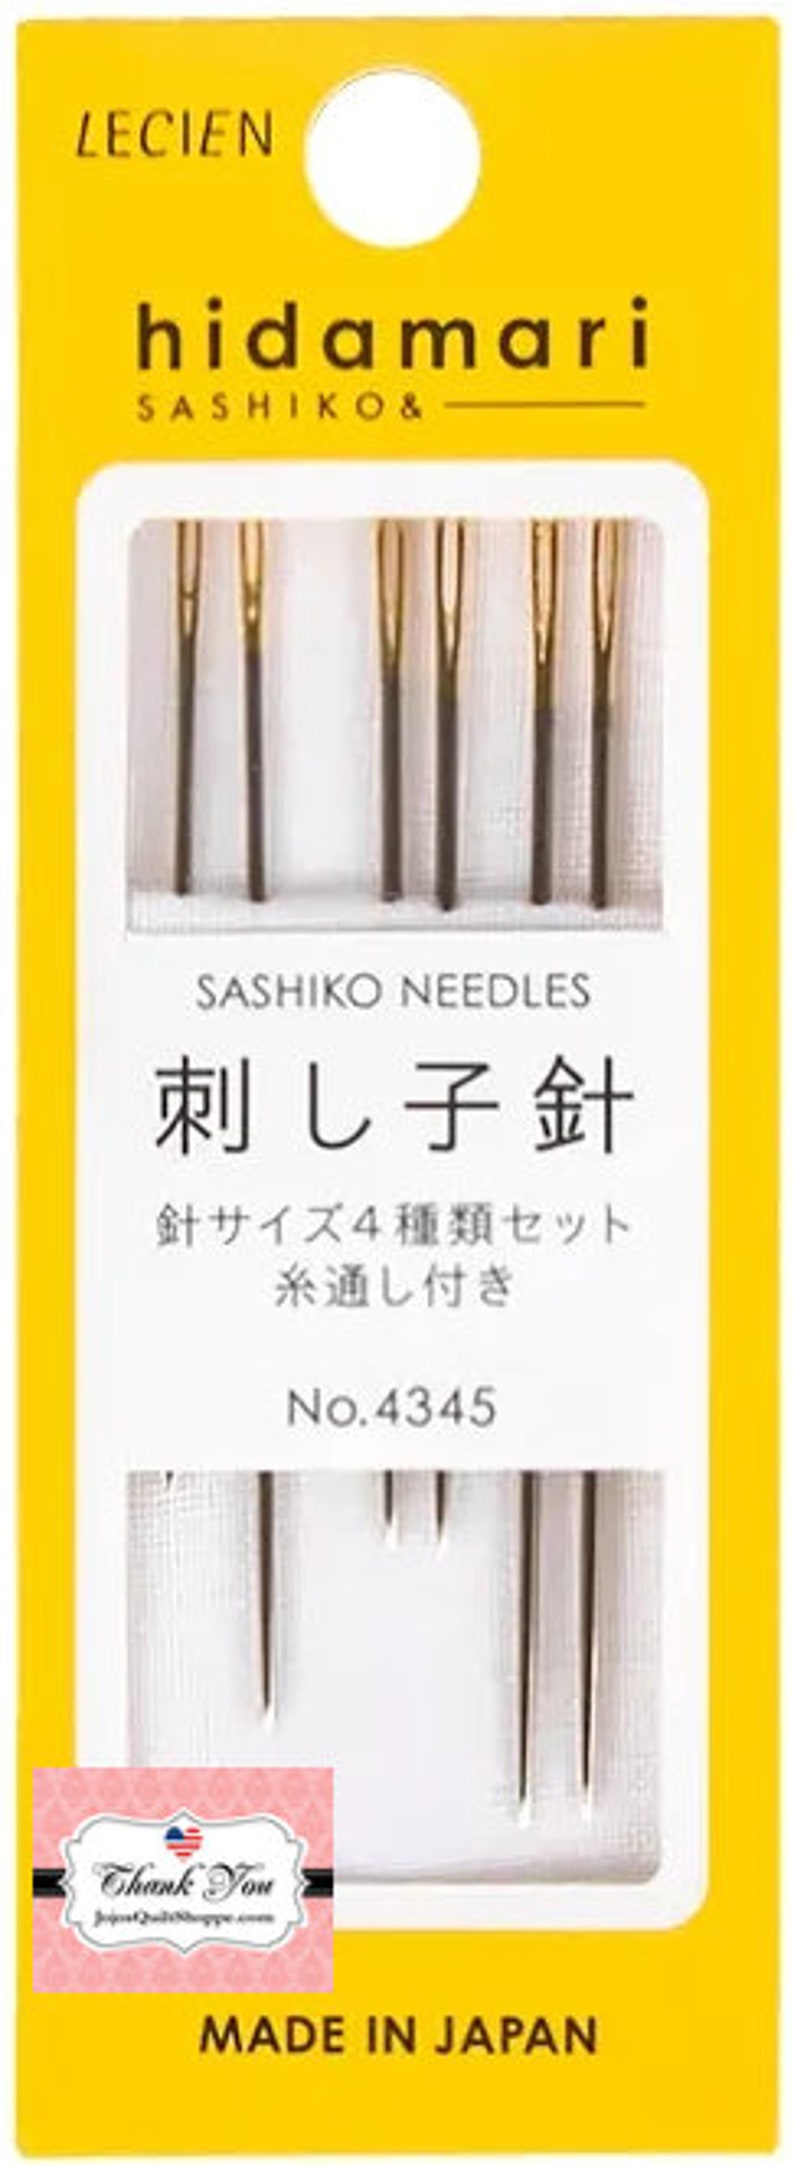 Hidamari Sashiko Assorted Needles and Threader 6 needles to use with Cosmo Embroidery Floss by Lecien of Japan 4345 image 2